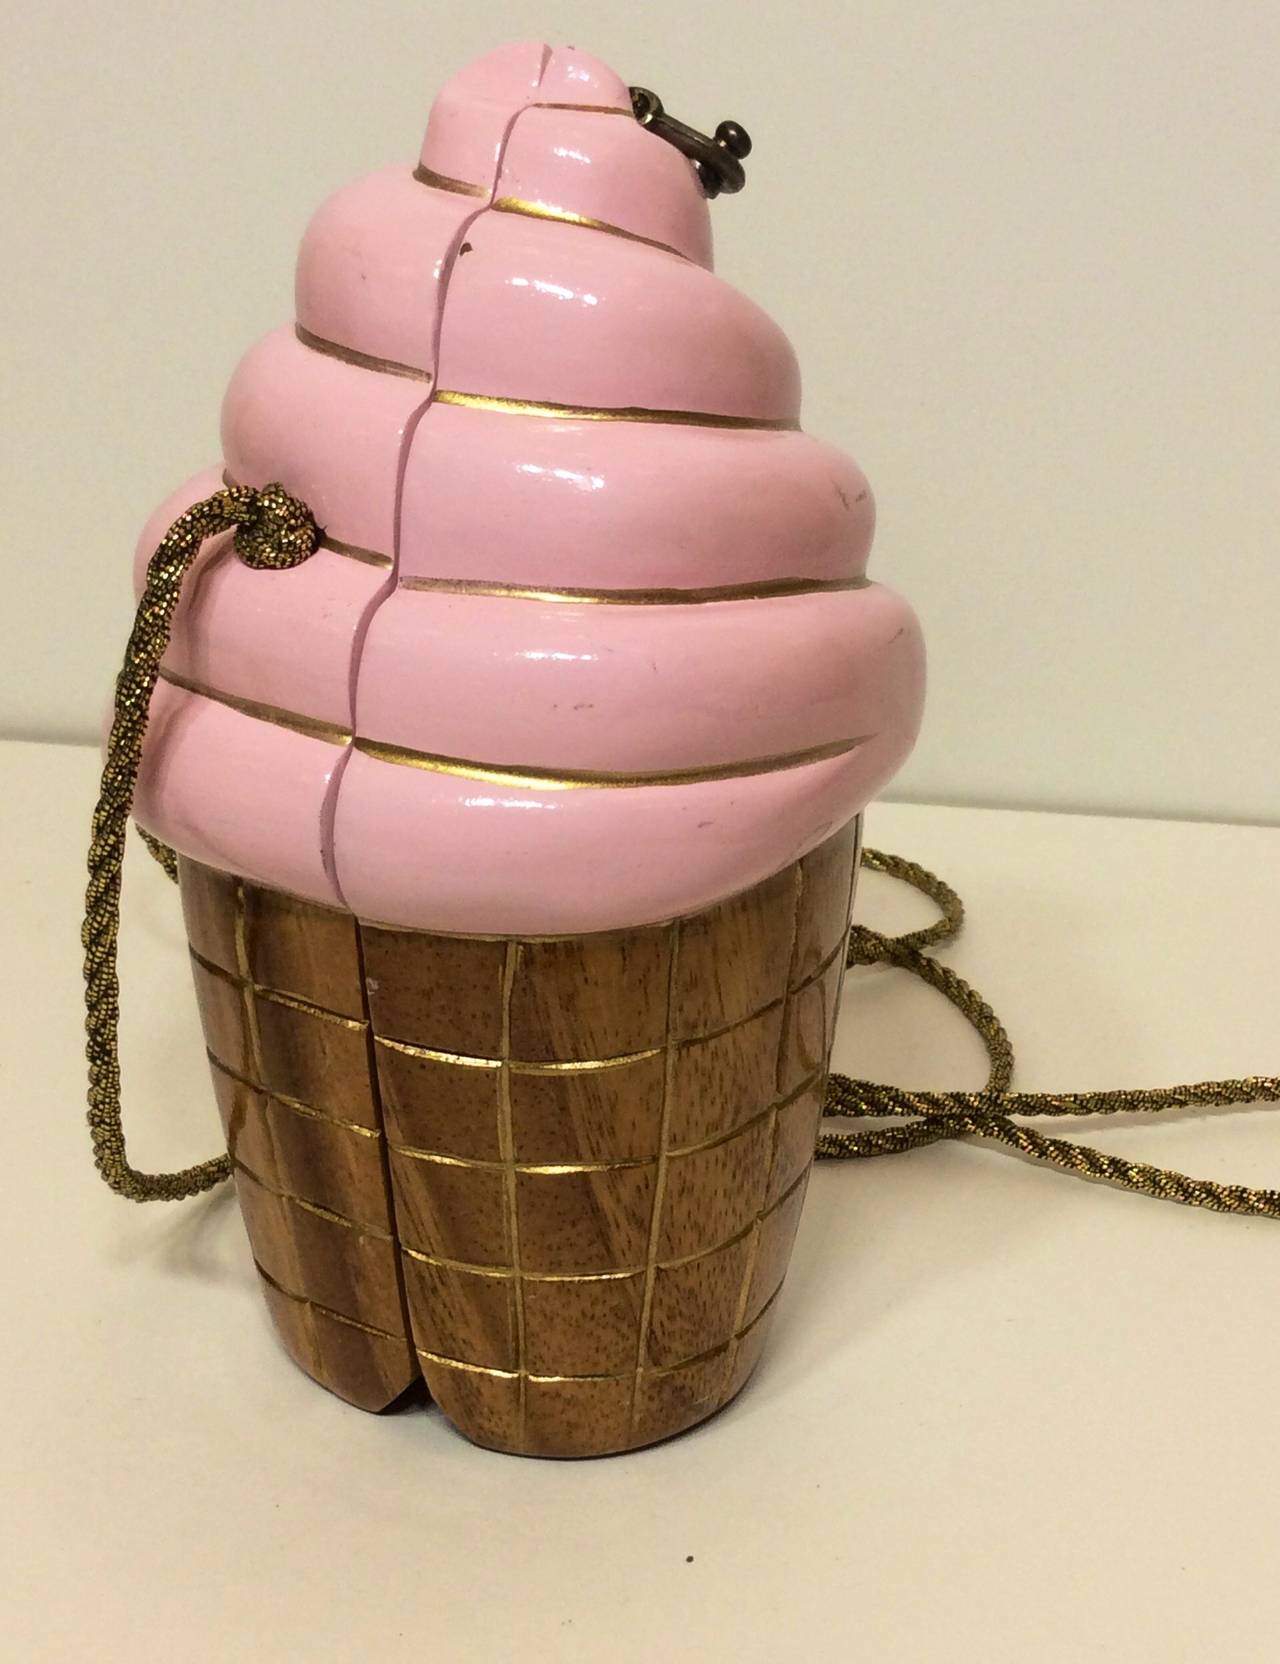 Timmy Woods Beverly Hills Rare Cupcake Ice Cream Cone Handbag In Good Condition For Sale In Lake Park, FL